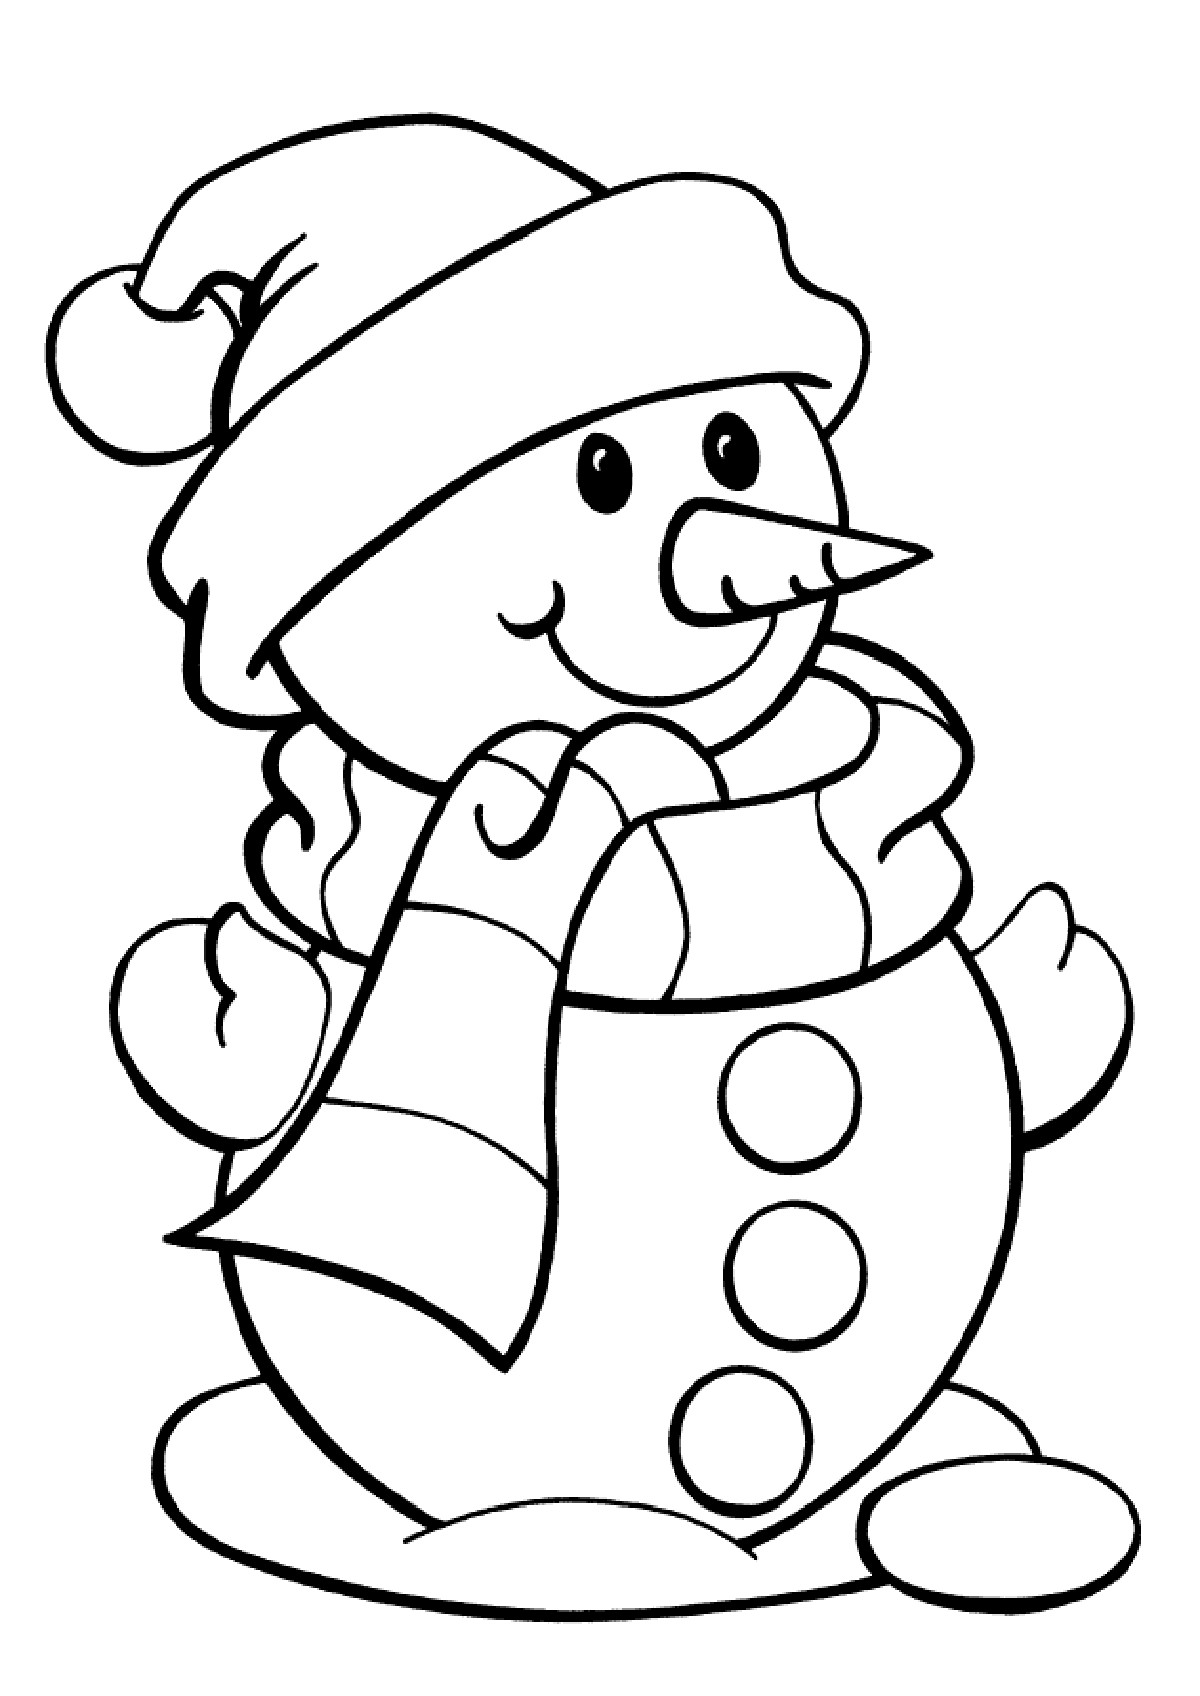 Snowman Coloring Pages Printable
 Coloring Coloring